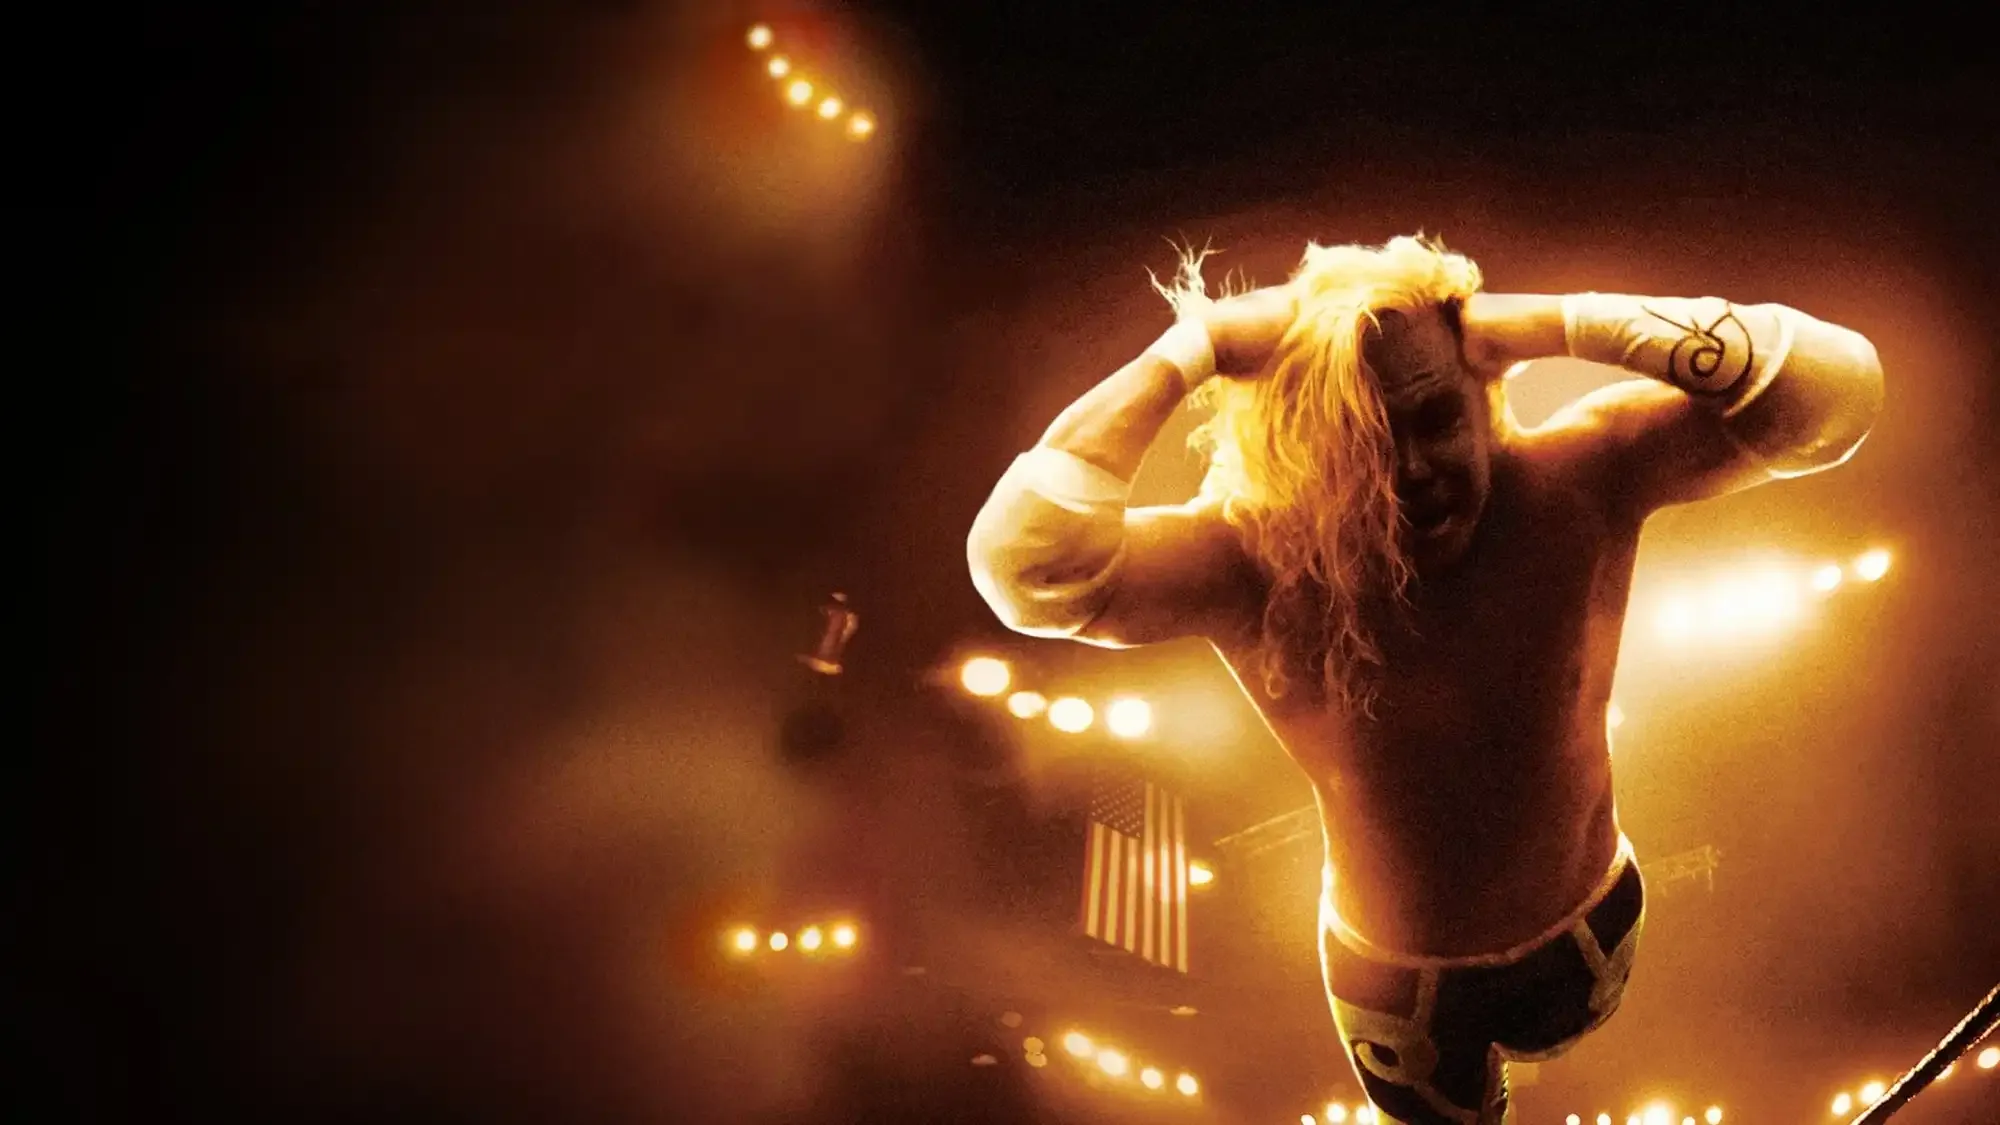 The Wrestler movie review